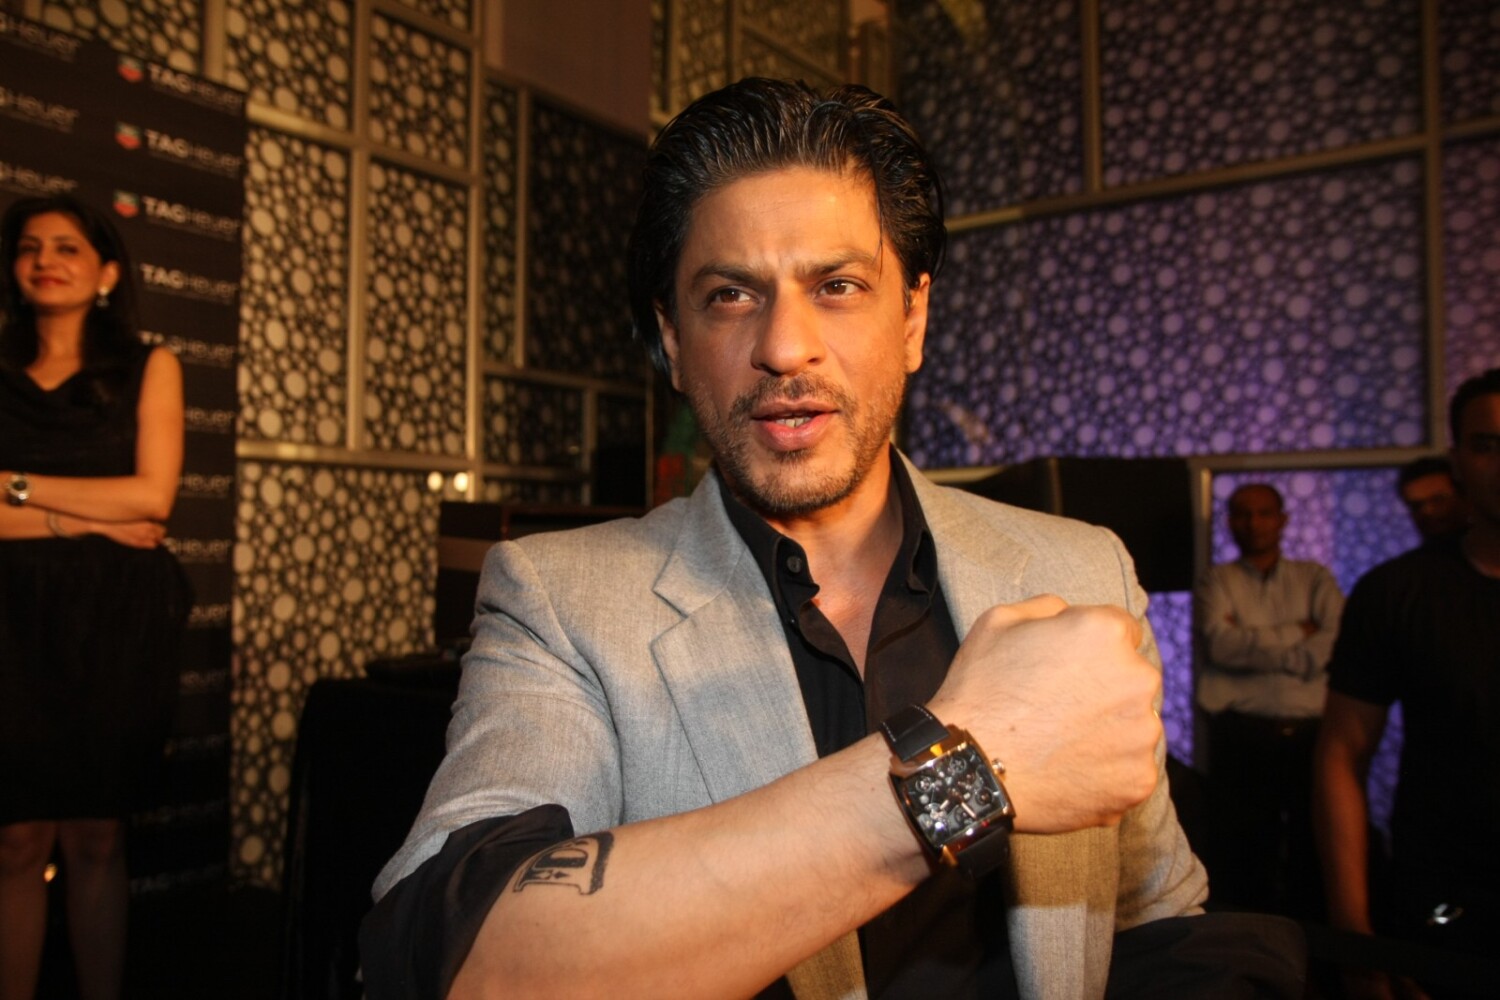 Shah Rukh Khan Striking Funny Poses To Showcase Swiss Watch Brand Tag Heuer New Range Watches At 2355